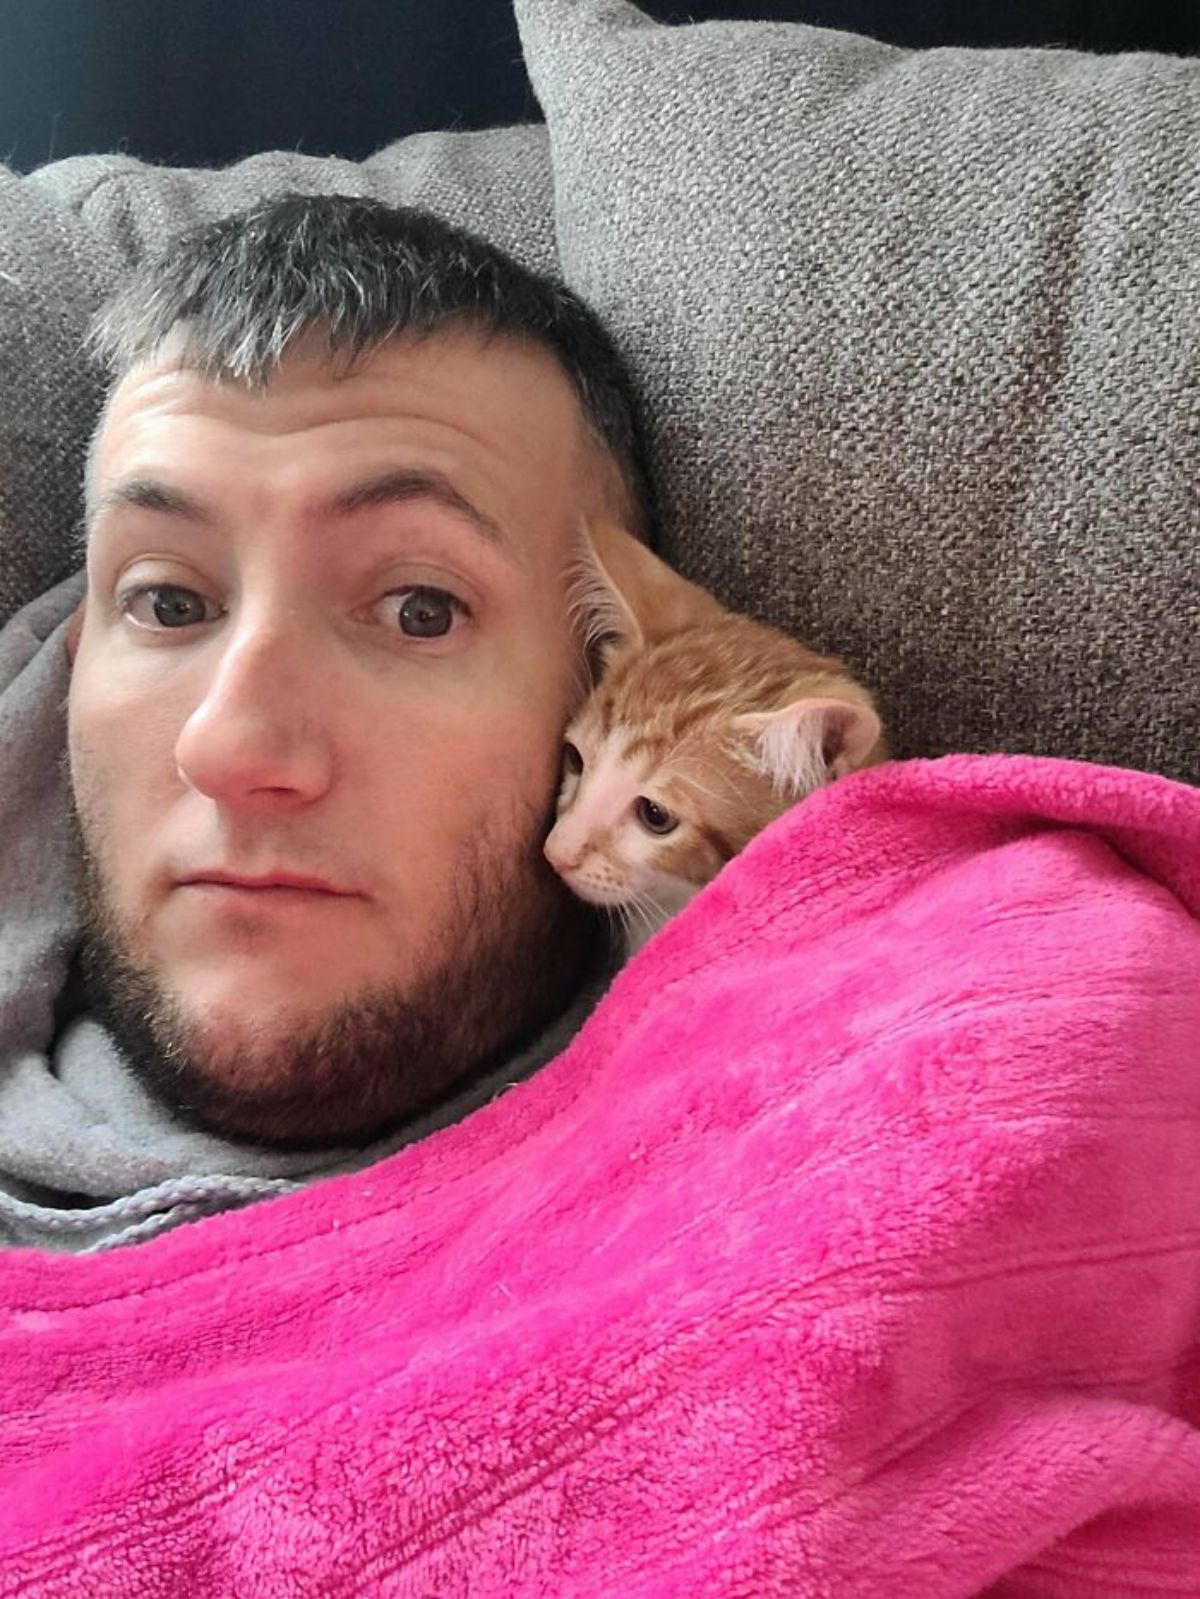 orange and white kitten laying under a pink blanket next to a man's face